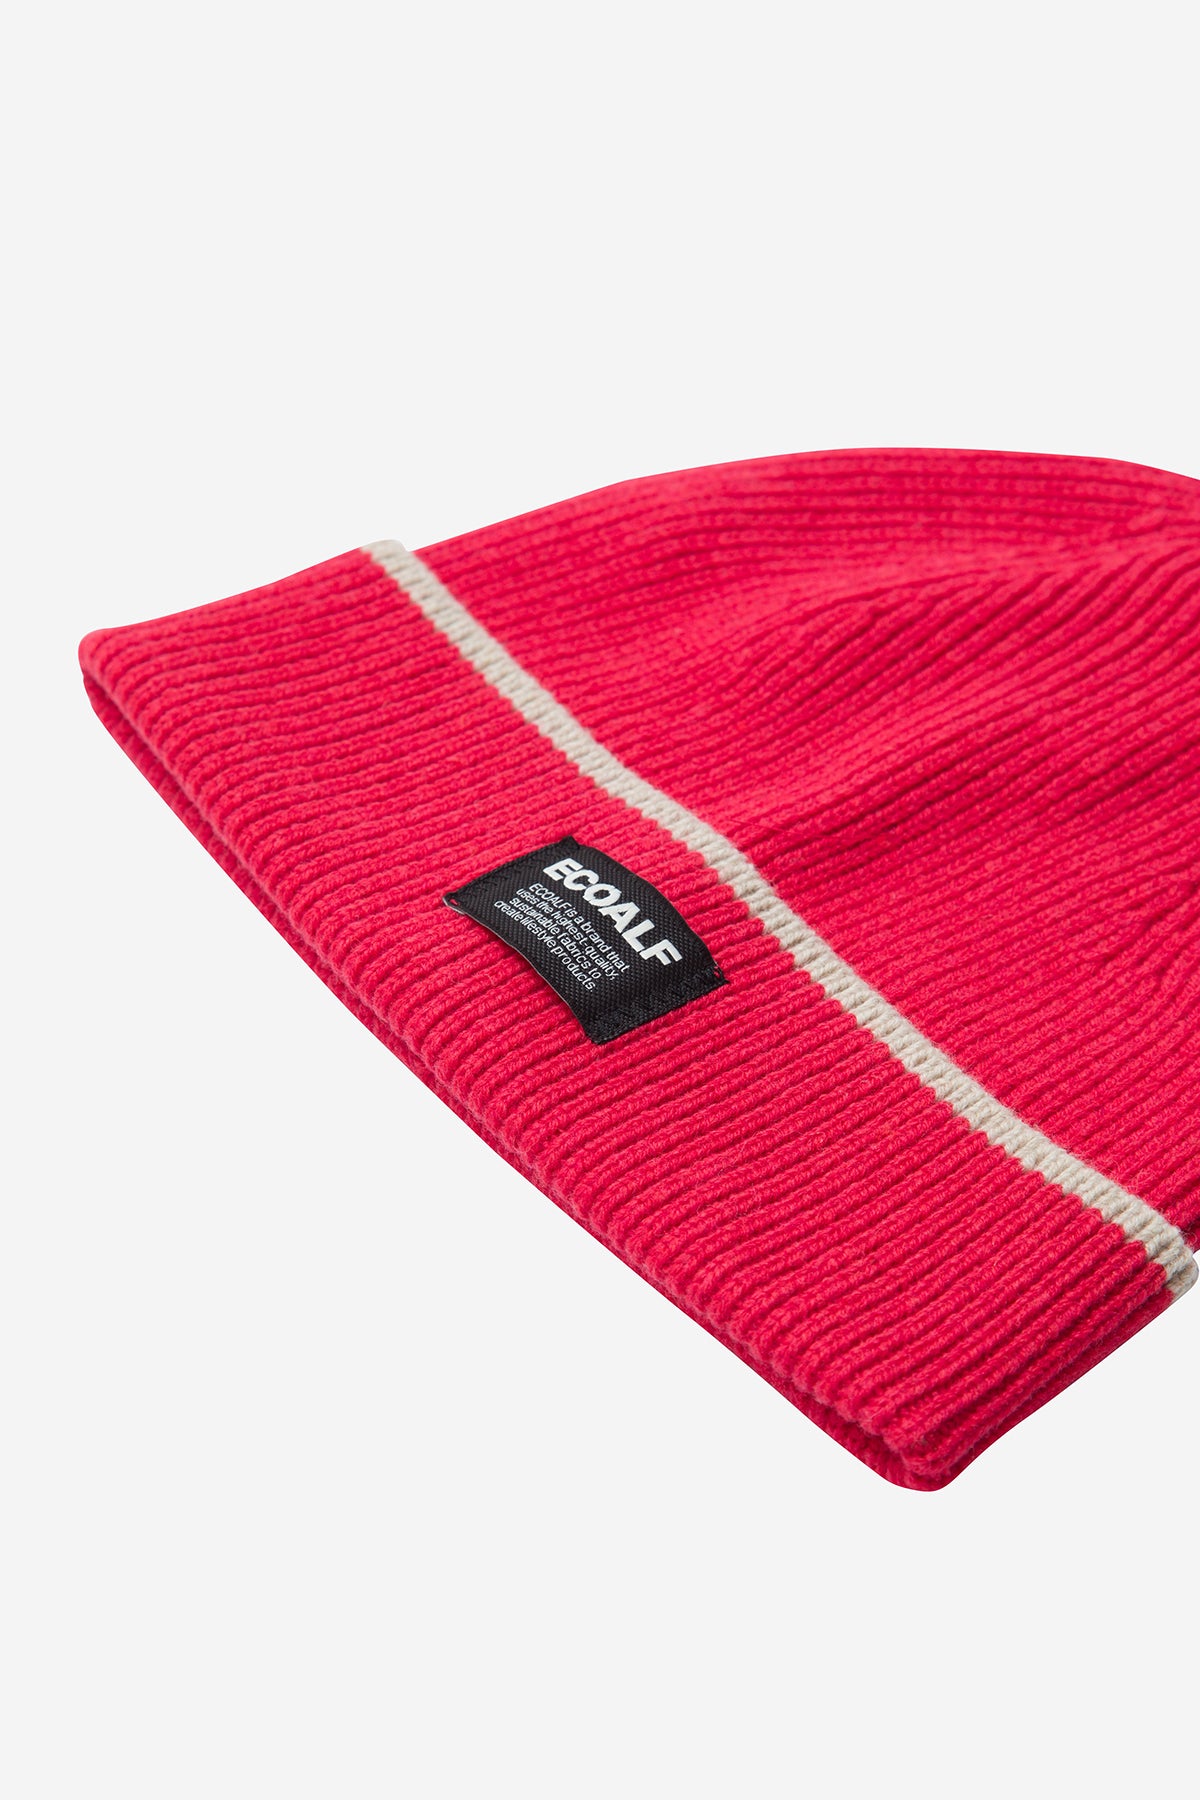 RED TRIWOOL HAT 